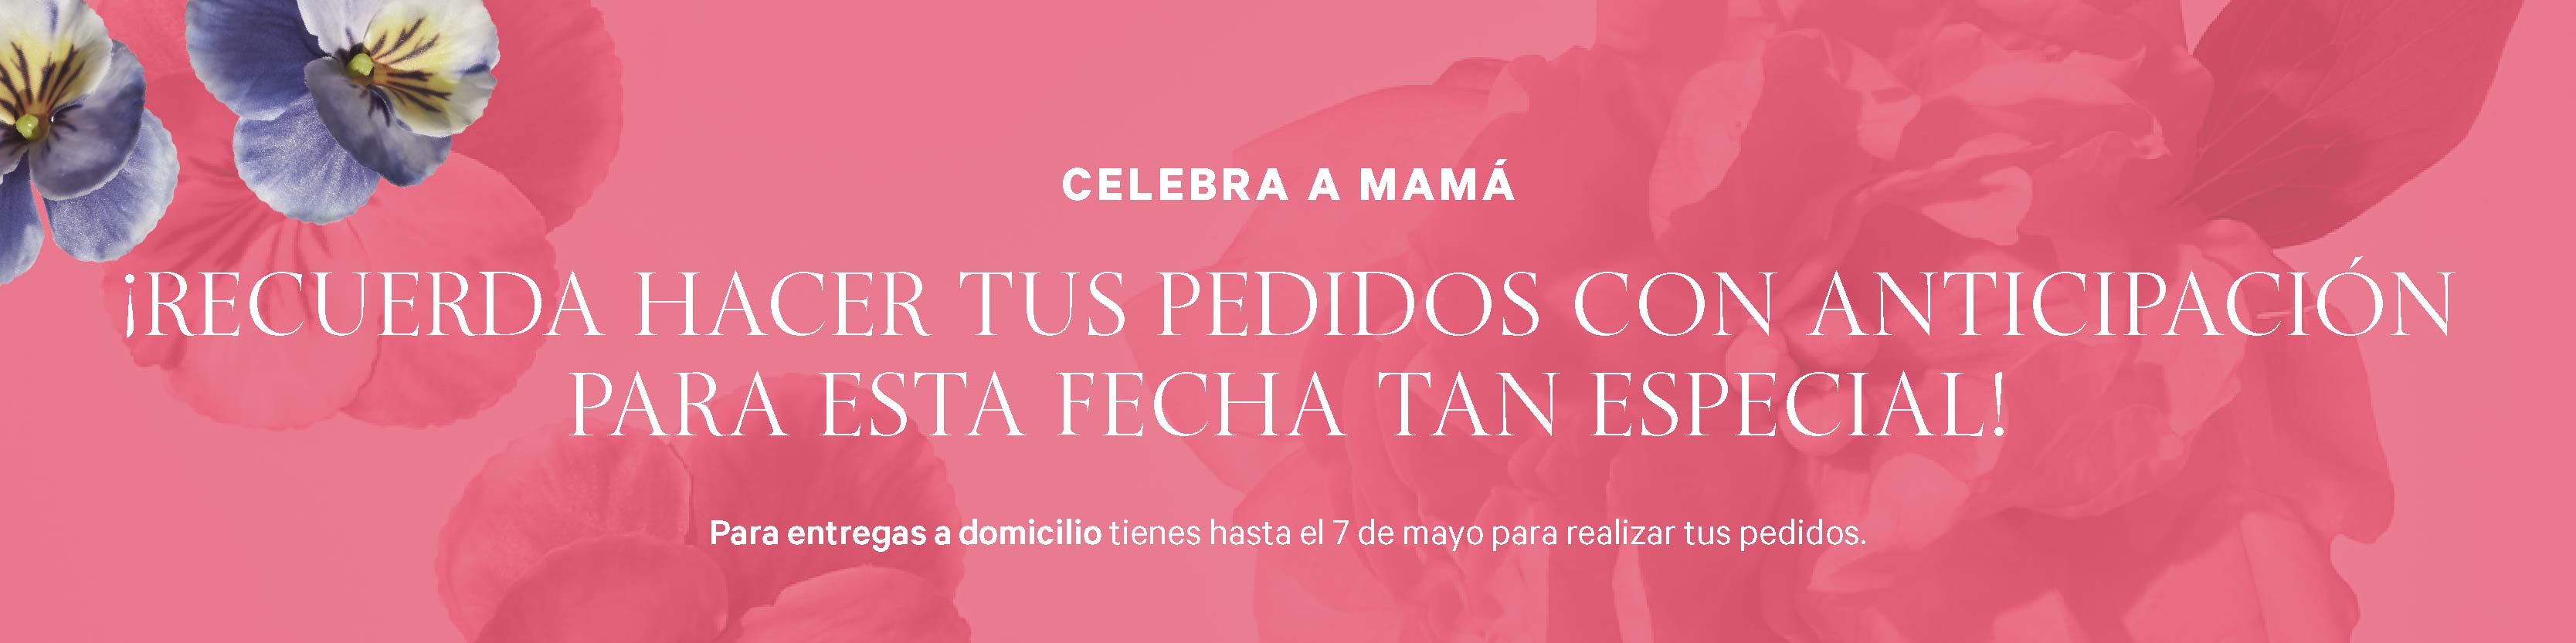 MOTHER'S DAY